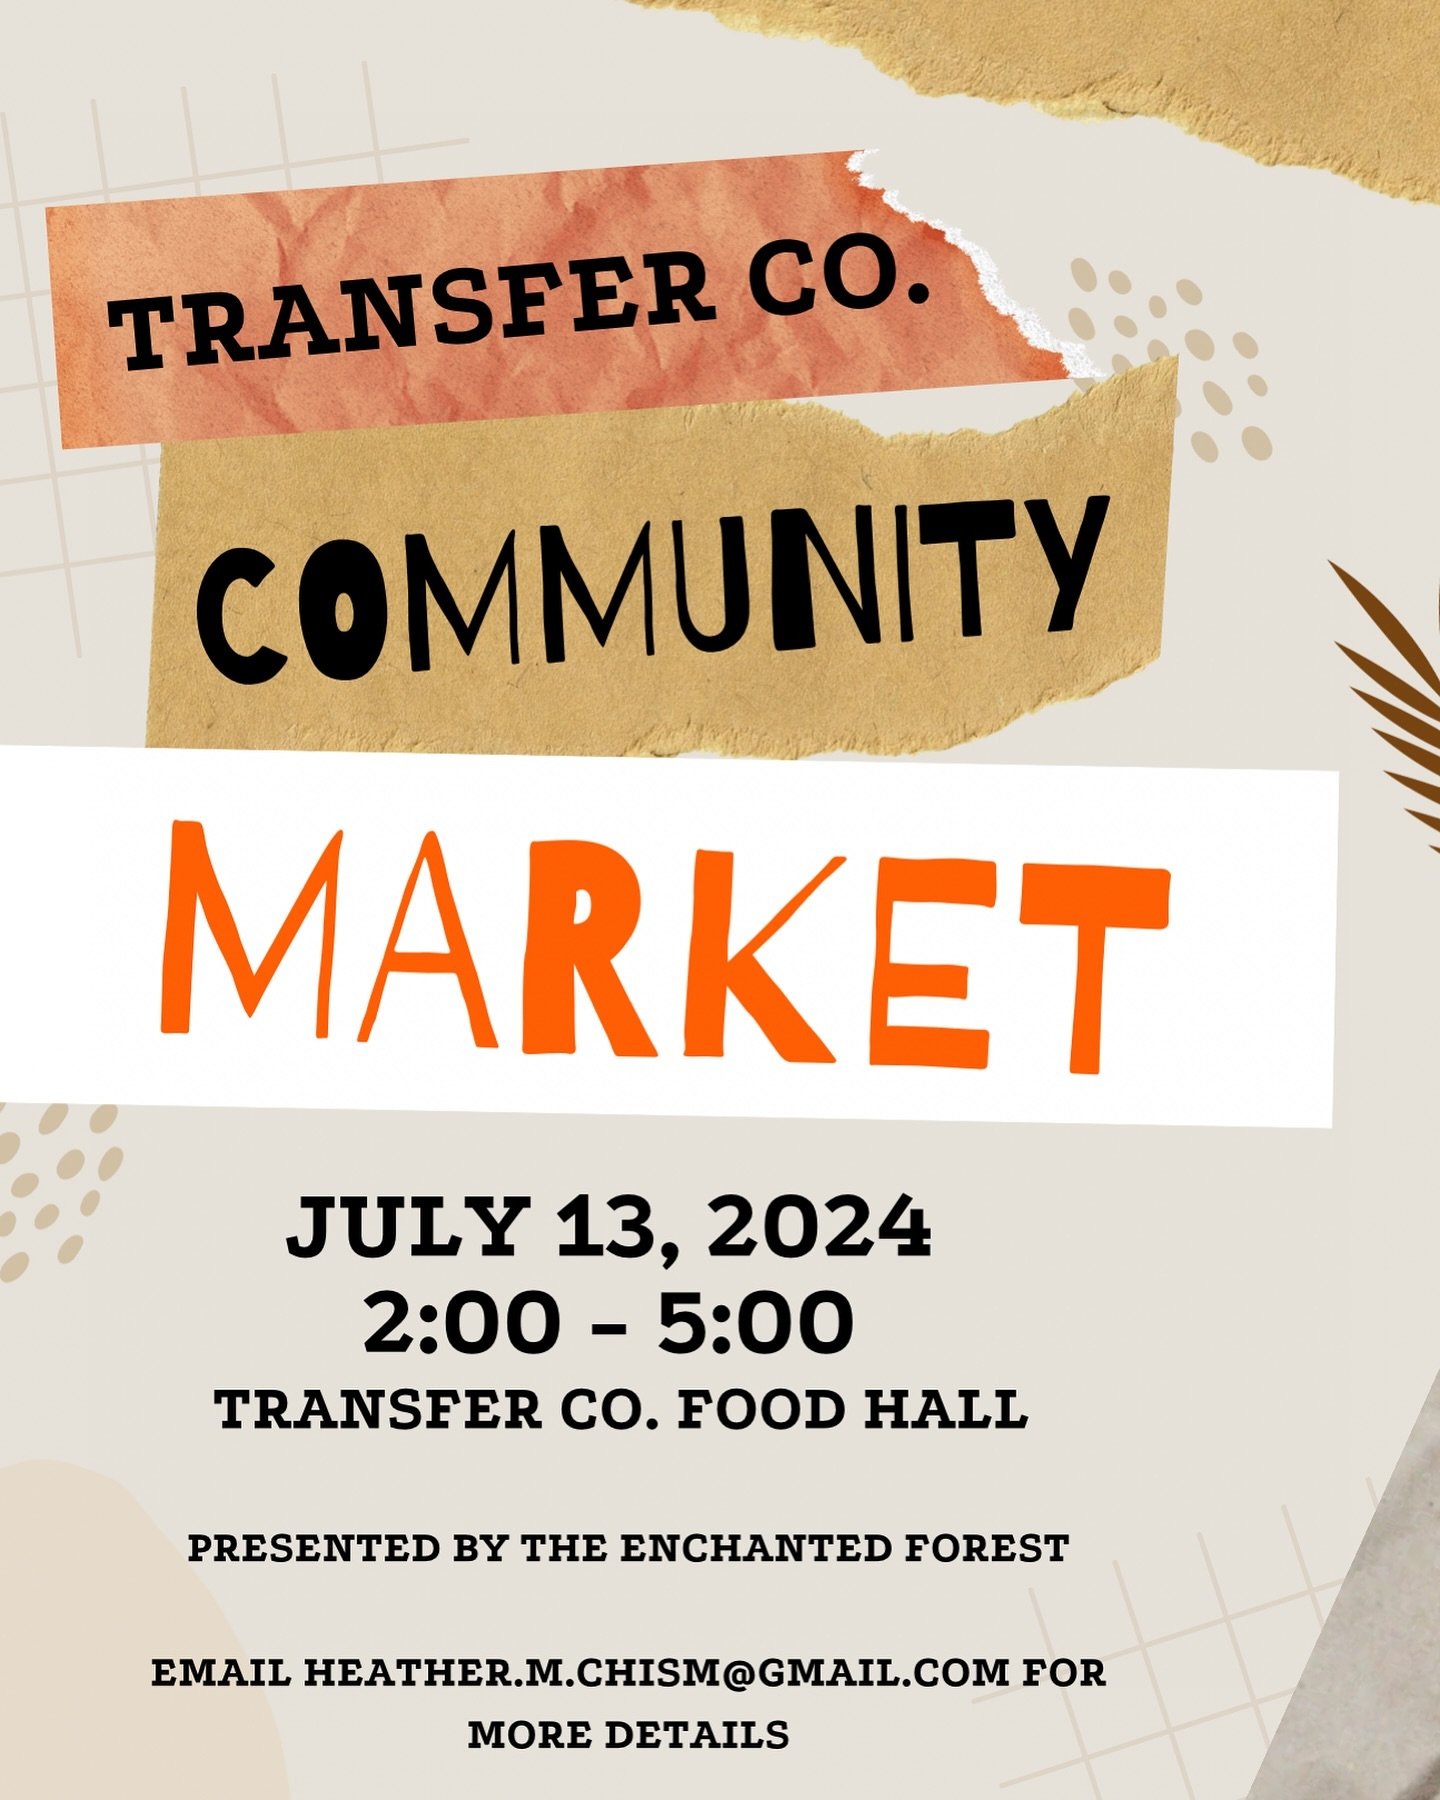 New event alert⚡️

Come hang out with us at the Transfer Co. Community Market! One of the only indoor markets in the Triangle

- - - - - -

DM us for vendor info